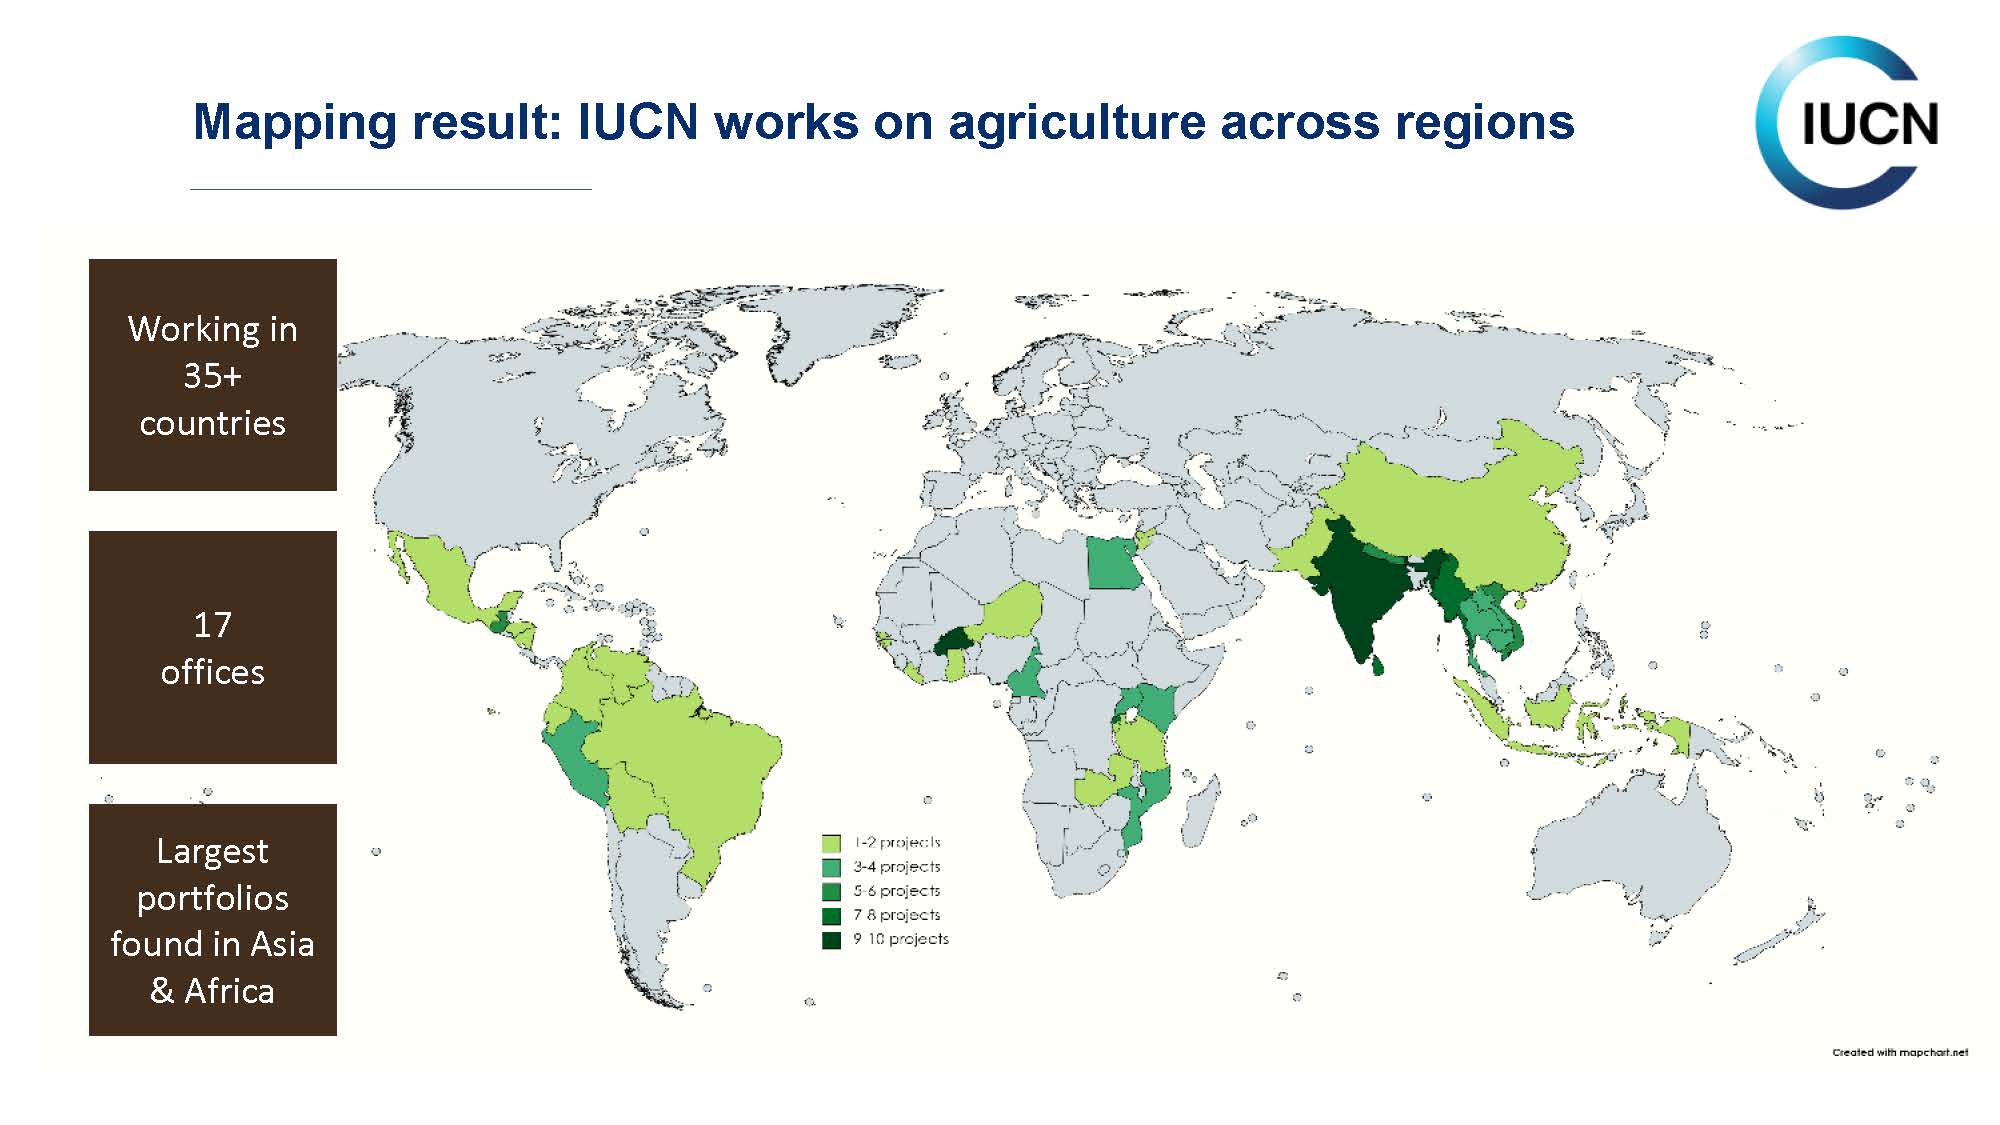 IUCN work on agriculture across regions